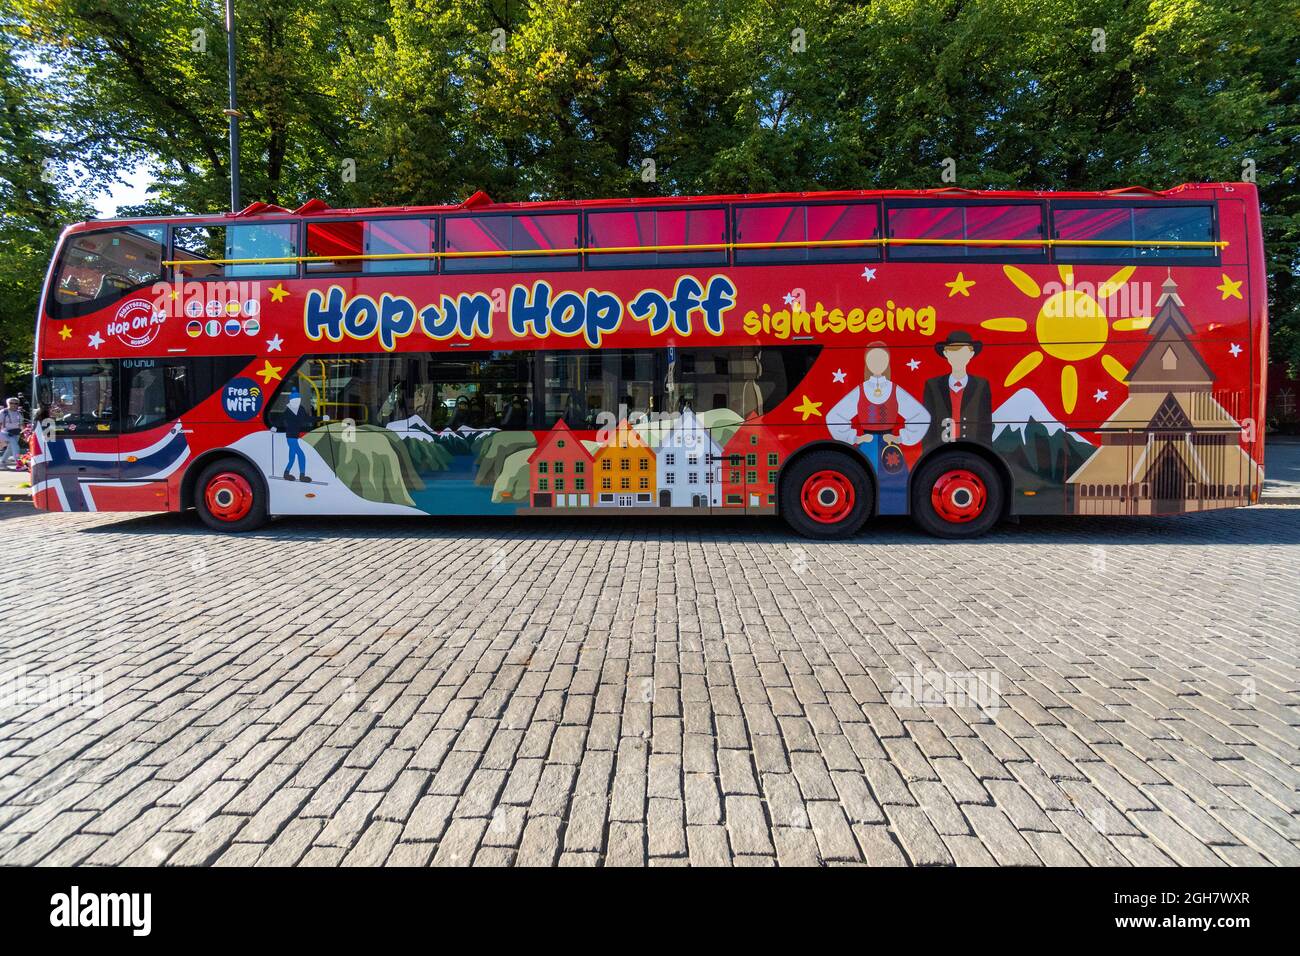 Hop on hop off sightseeing bus in Oslo, Norway Stock Photo